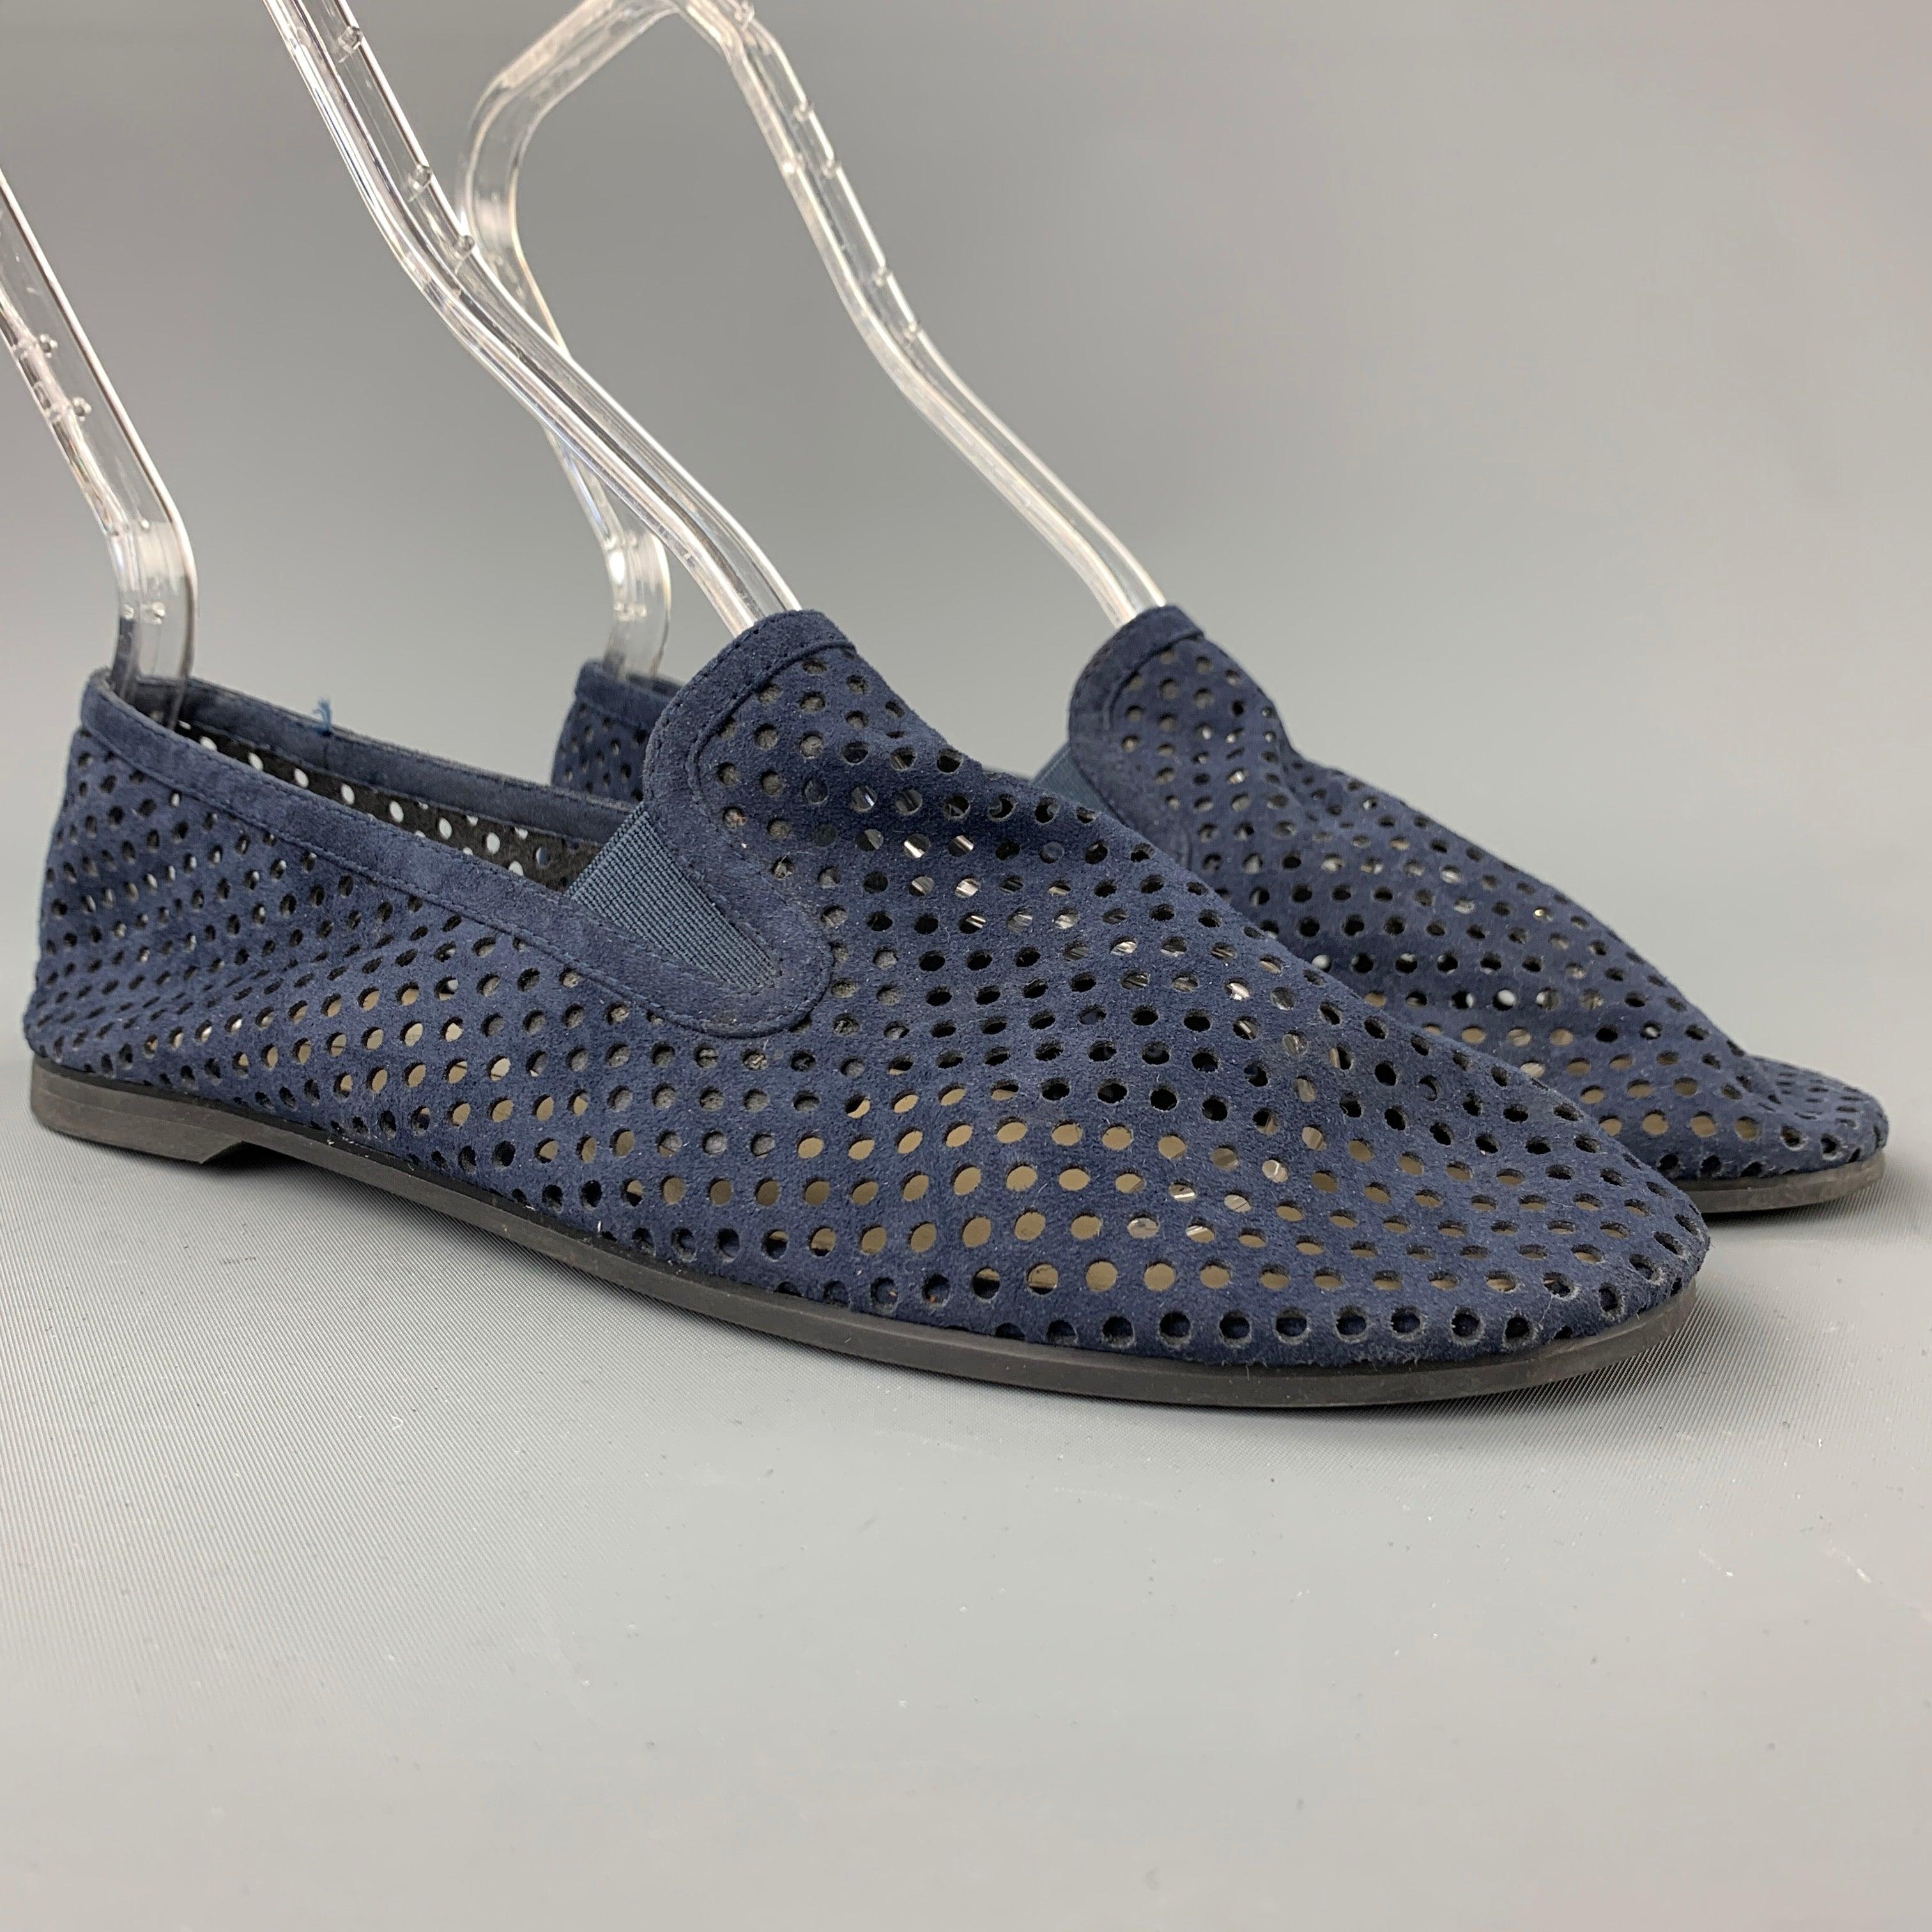 STELLA McCARTNEY flats comes in a navy perforated faux suede featuring a rubber sole.
Good
Pre-Owned Condition. 

Marked:   37.5 inches  Outsole: 9.5 inches  x 3 inches 
  
  
 
Reference: 108360
Category: Flats
More Details
    
Brand:  STELLA